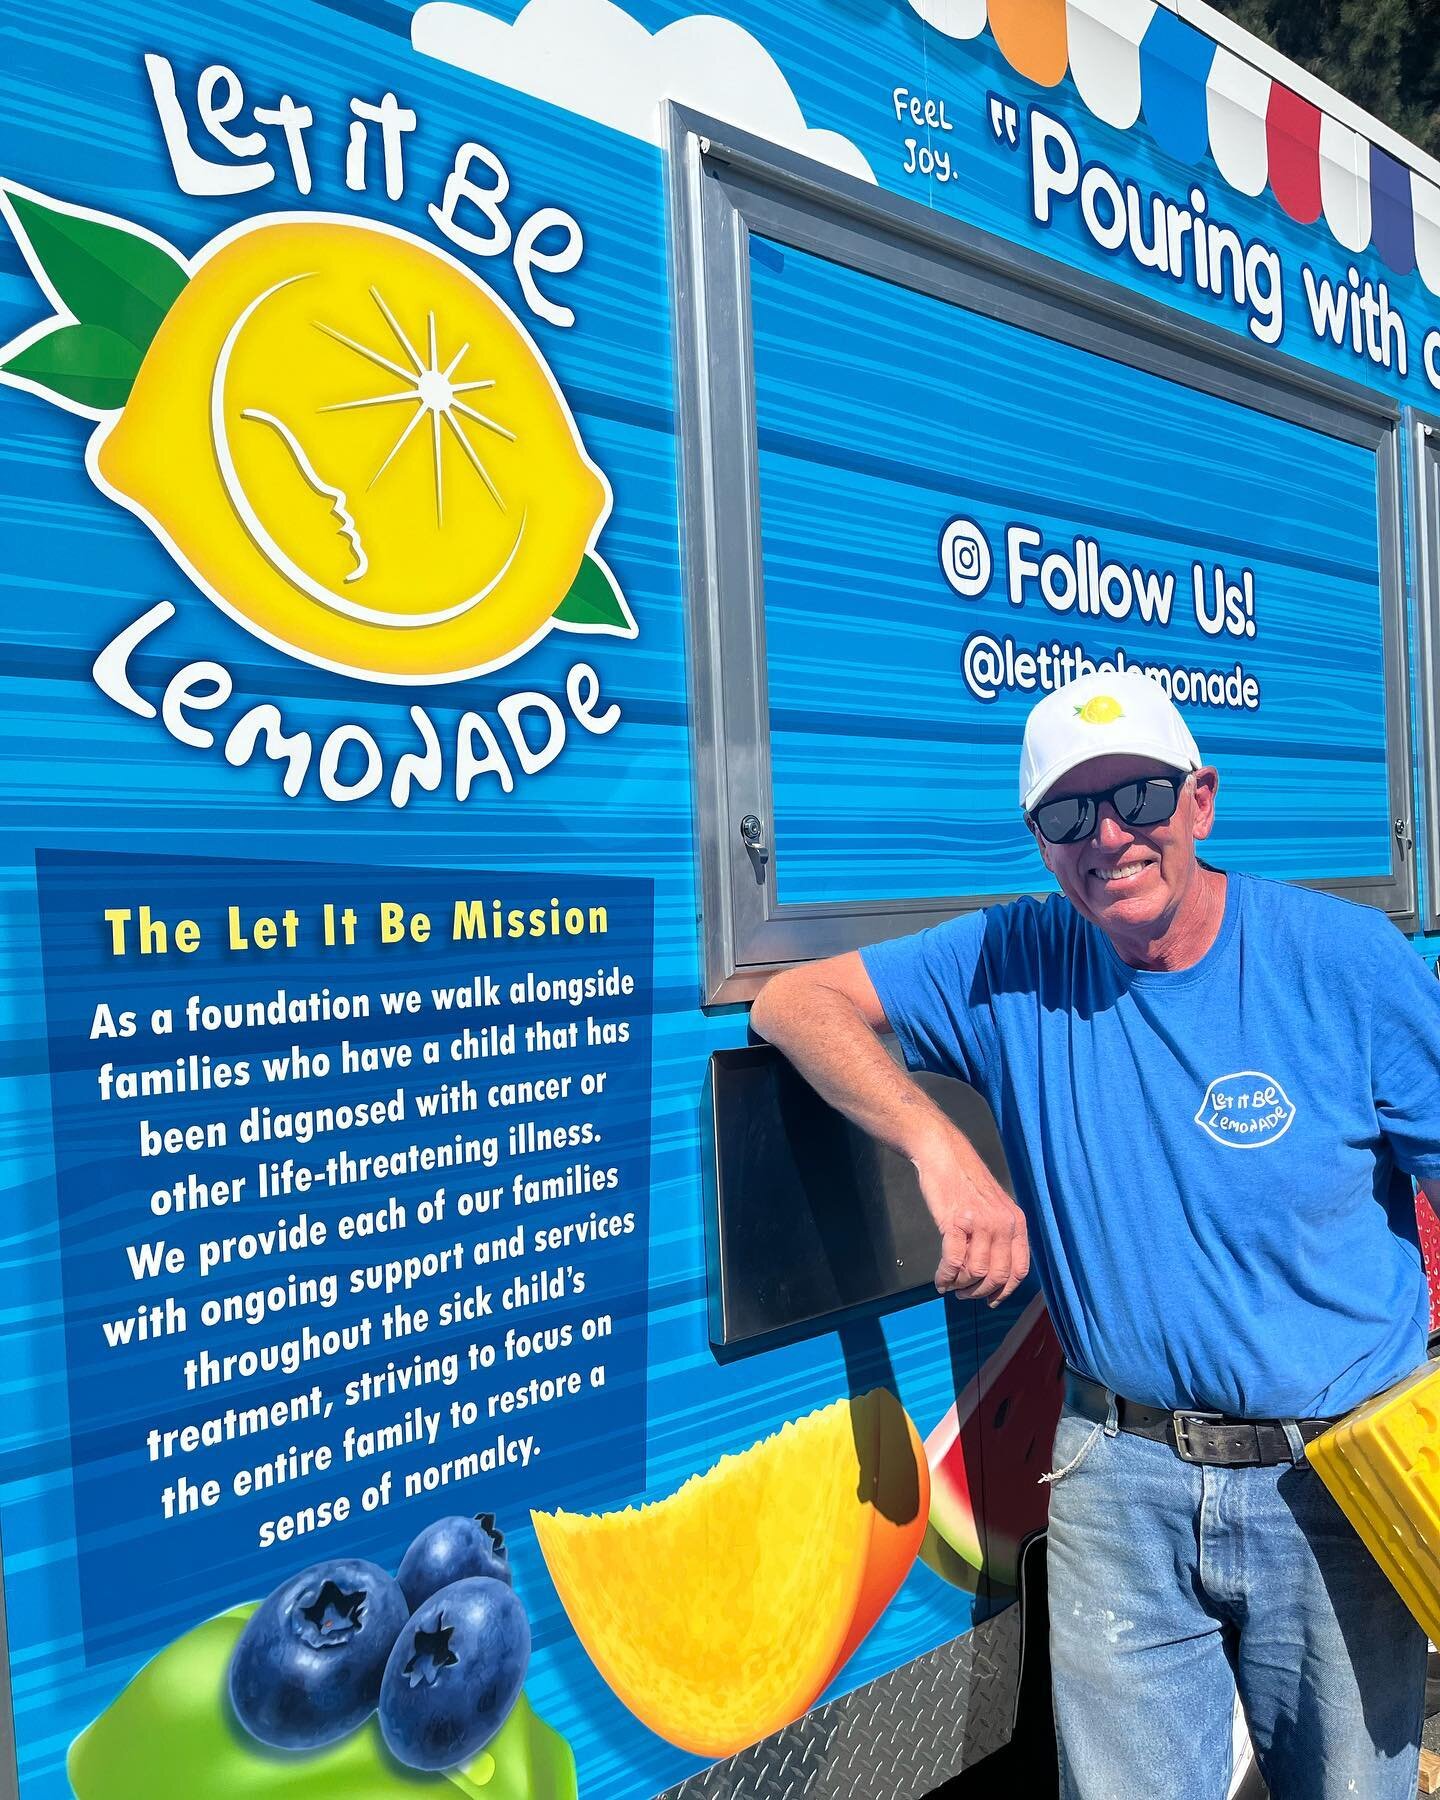 Greg is one of our volunteer drivers for our great lemonade trailer! He always transports the trailer safely and efficiently! His dedication and kindness goes a long way! If you&rsquo;re ever looking for a volunteer opportunity and you consider yours